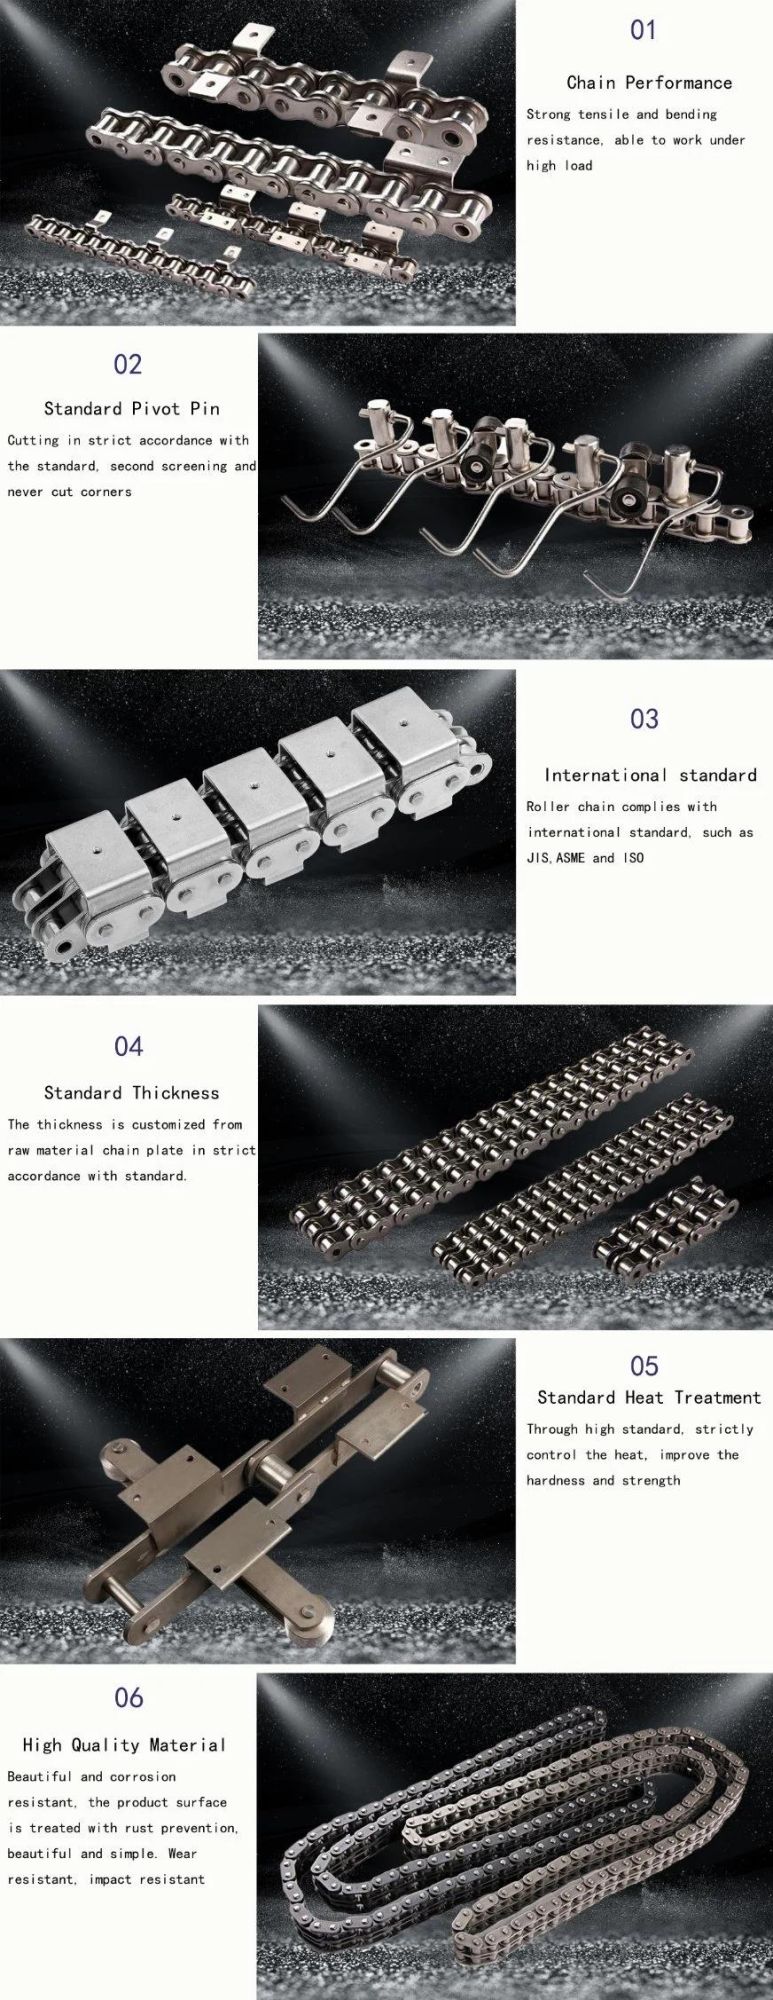 ANSI DIN Standard Chains Stainless Steel Attachment SA-1 Sk-1 Short Pitch Drive Conveyor Chains